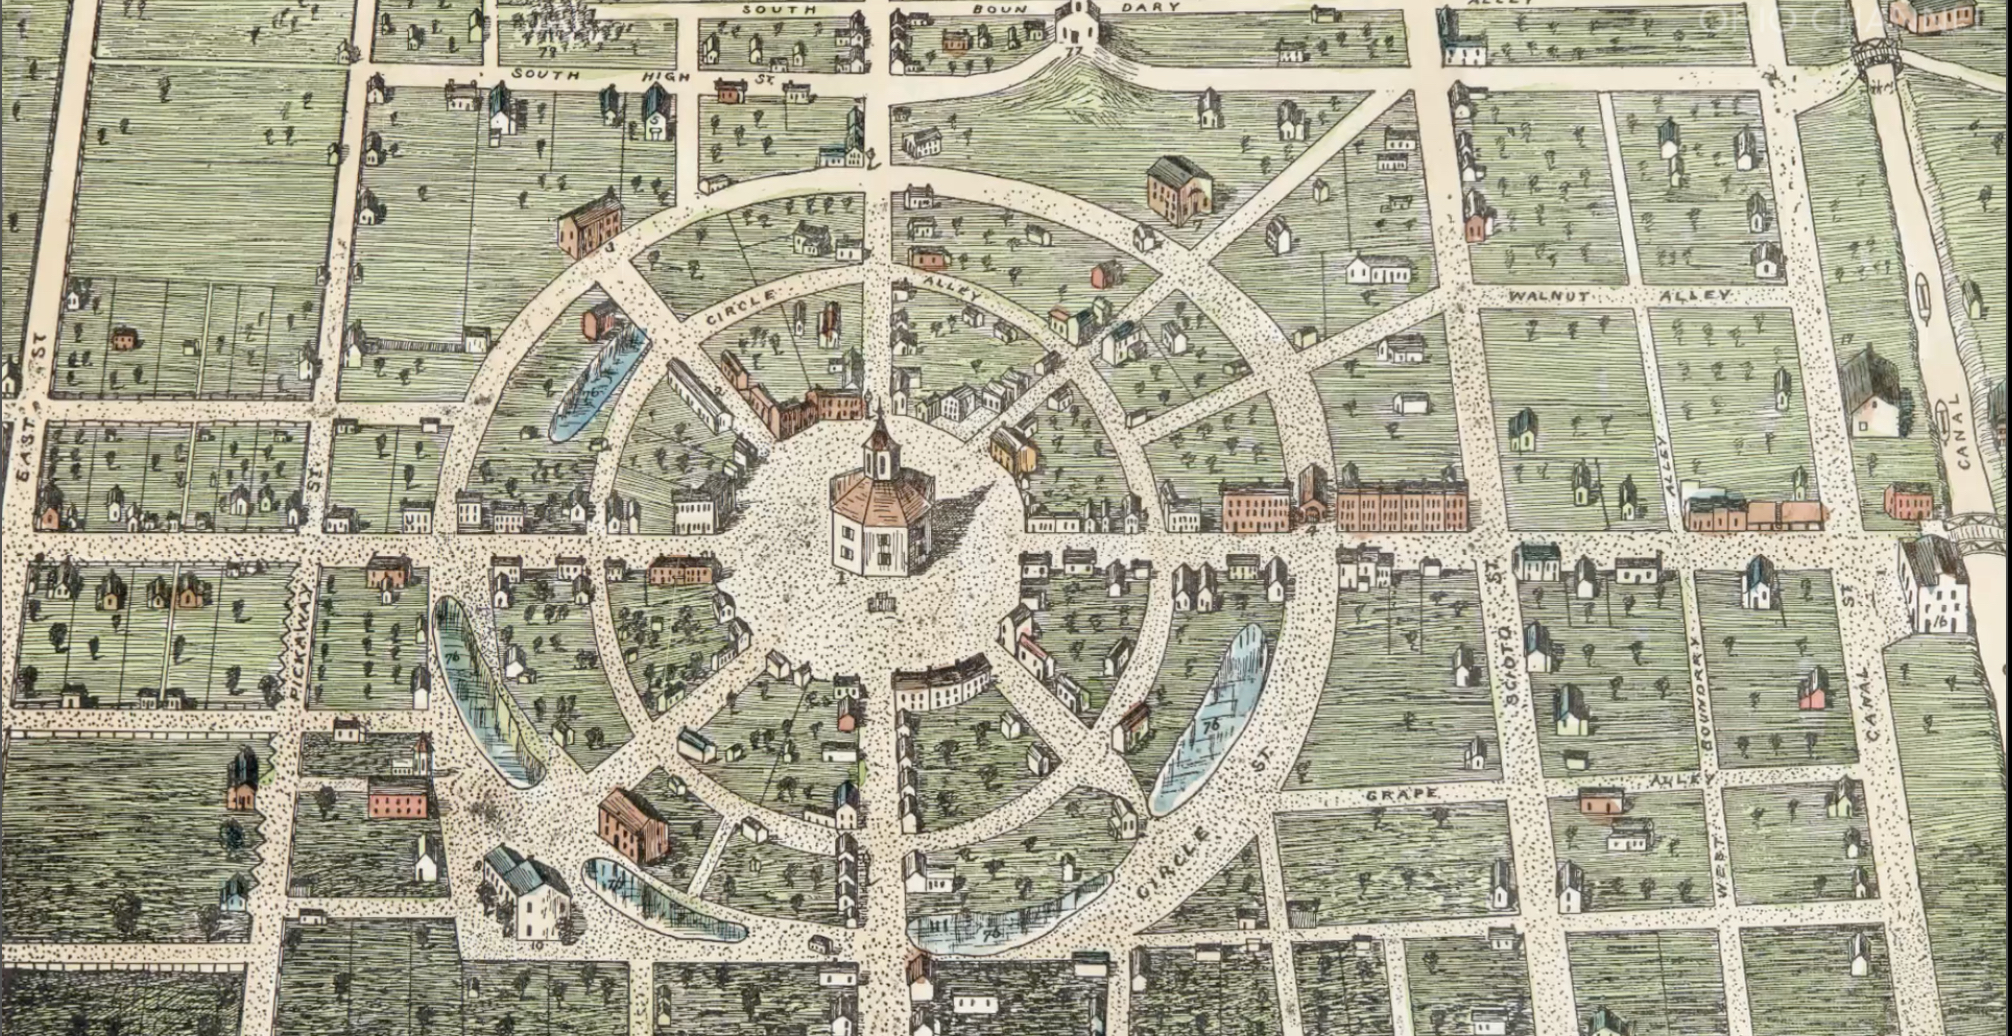 Historical map illustration depicting a planned city with radial streets emanating from a central point.